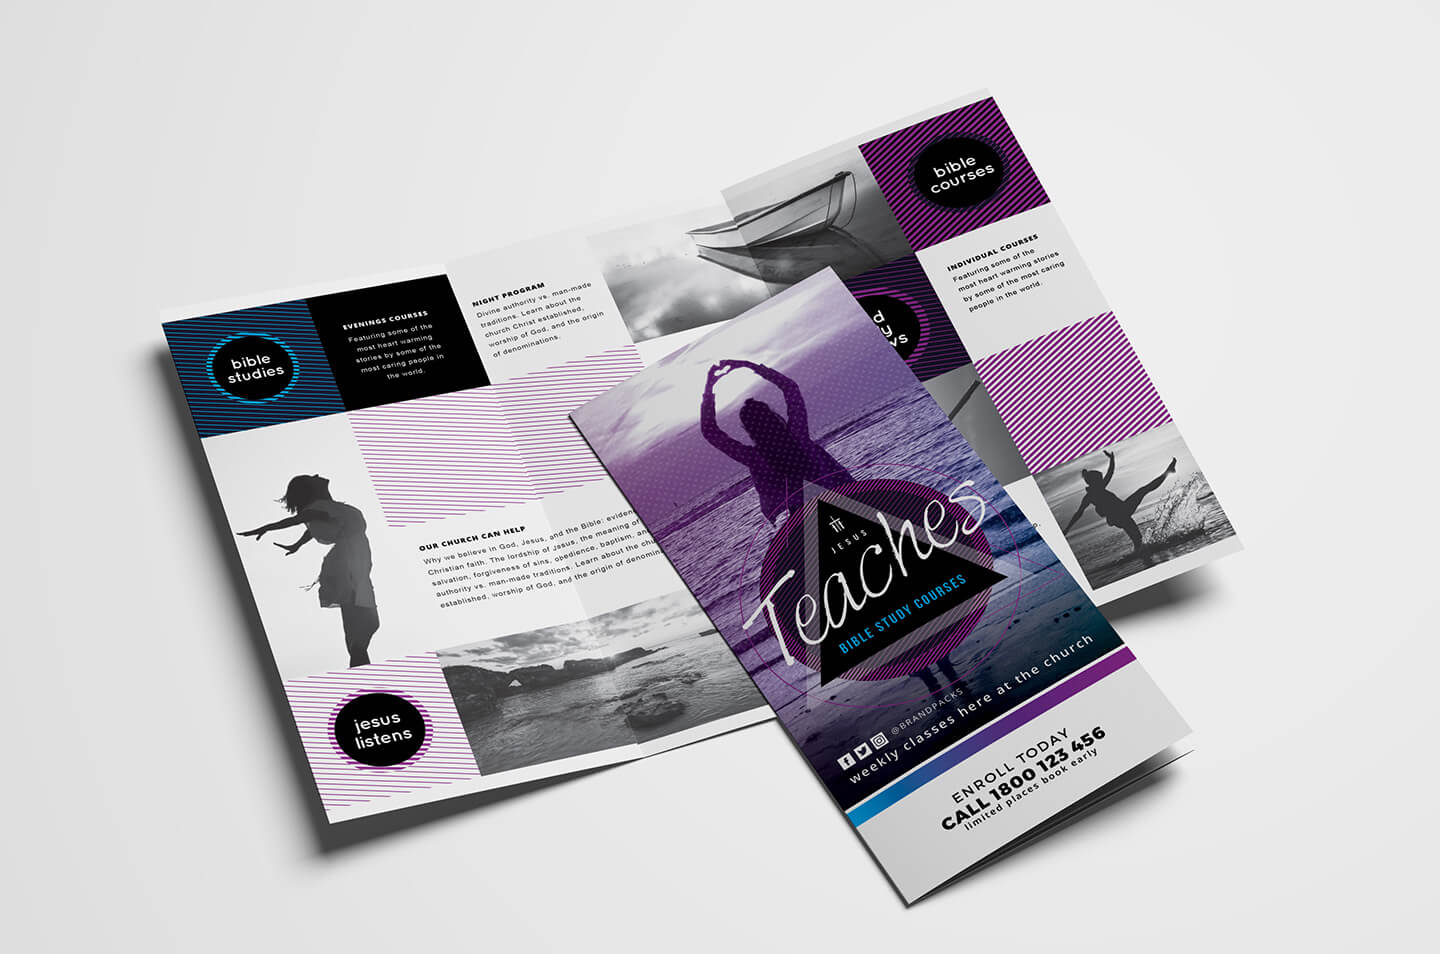 Free Church Templates – Photoshop Psd & Illustrator Ai With Regard To Bible Study Flyer Template Free